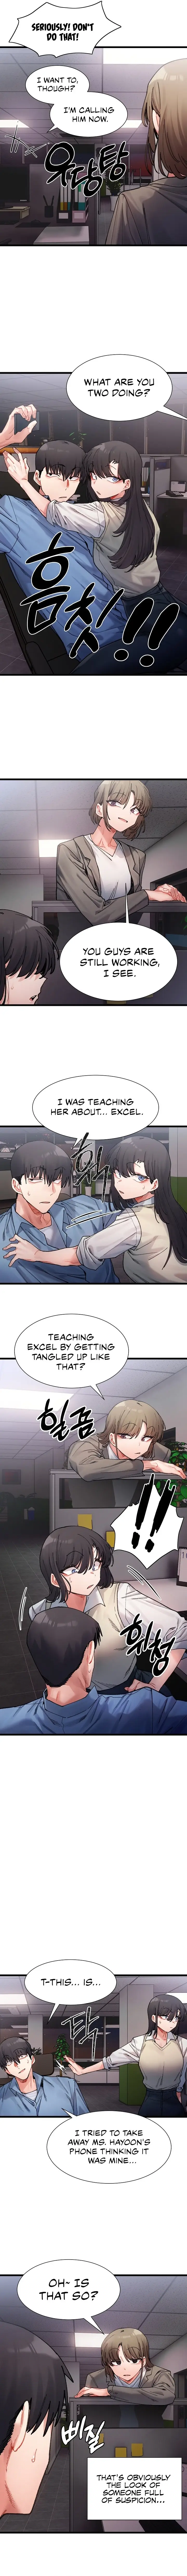 a-delicate-relationship-chap-2-9